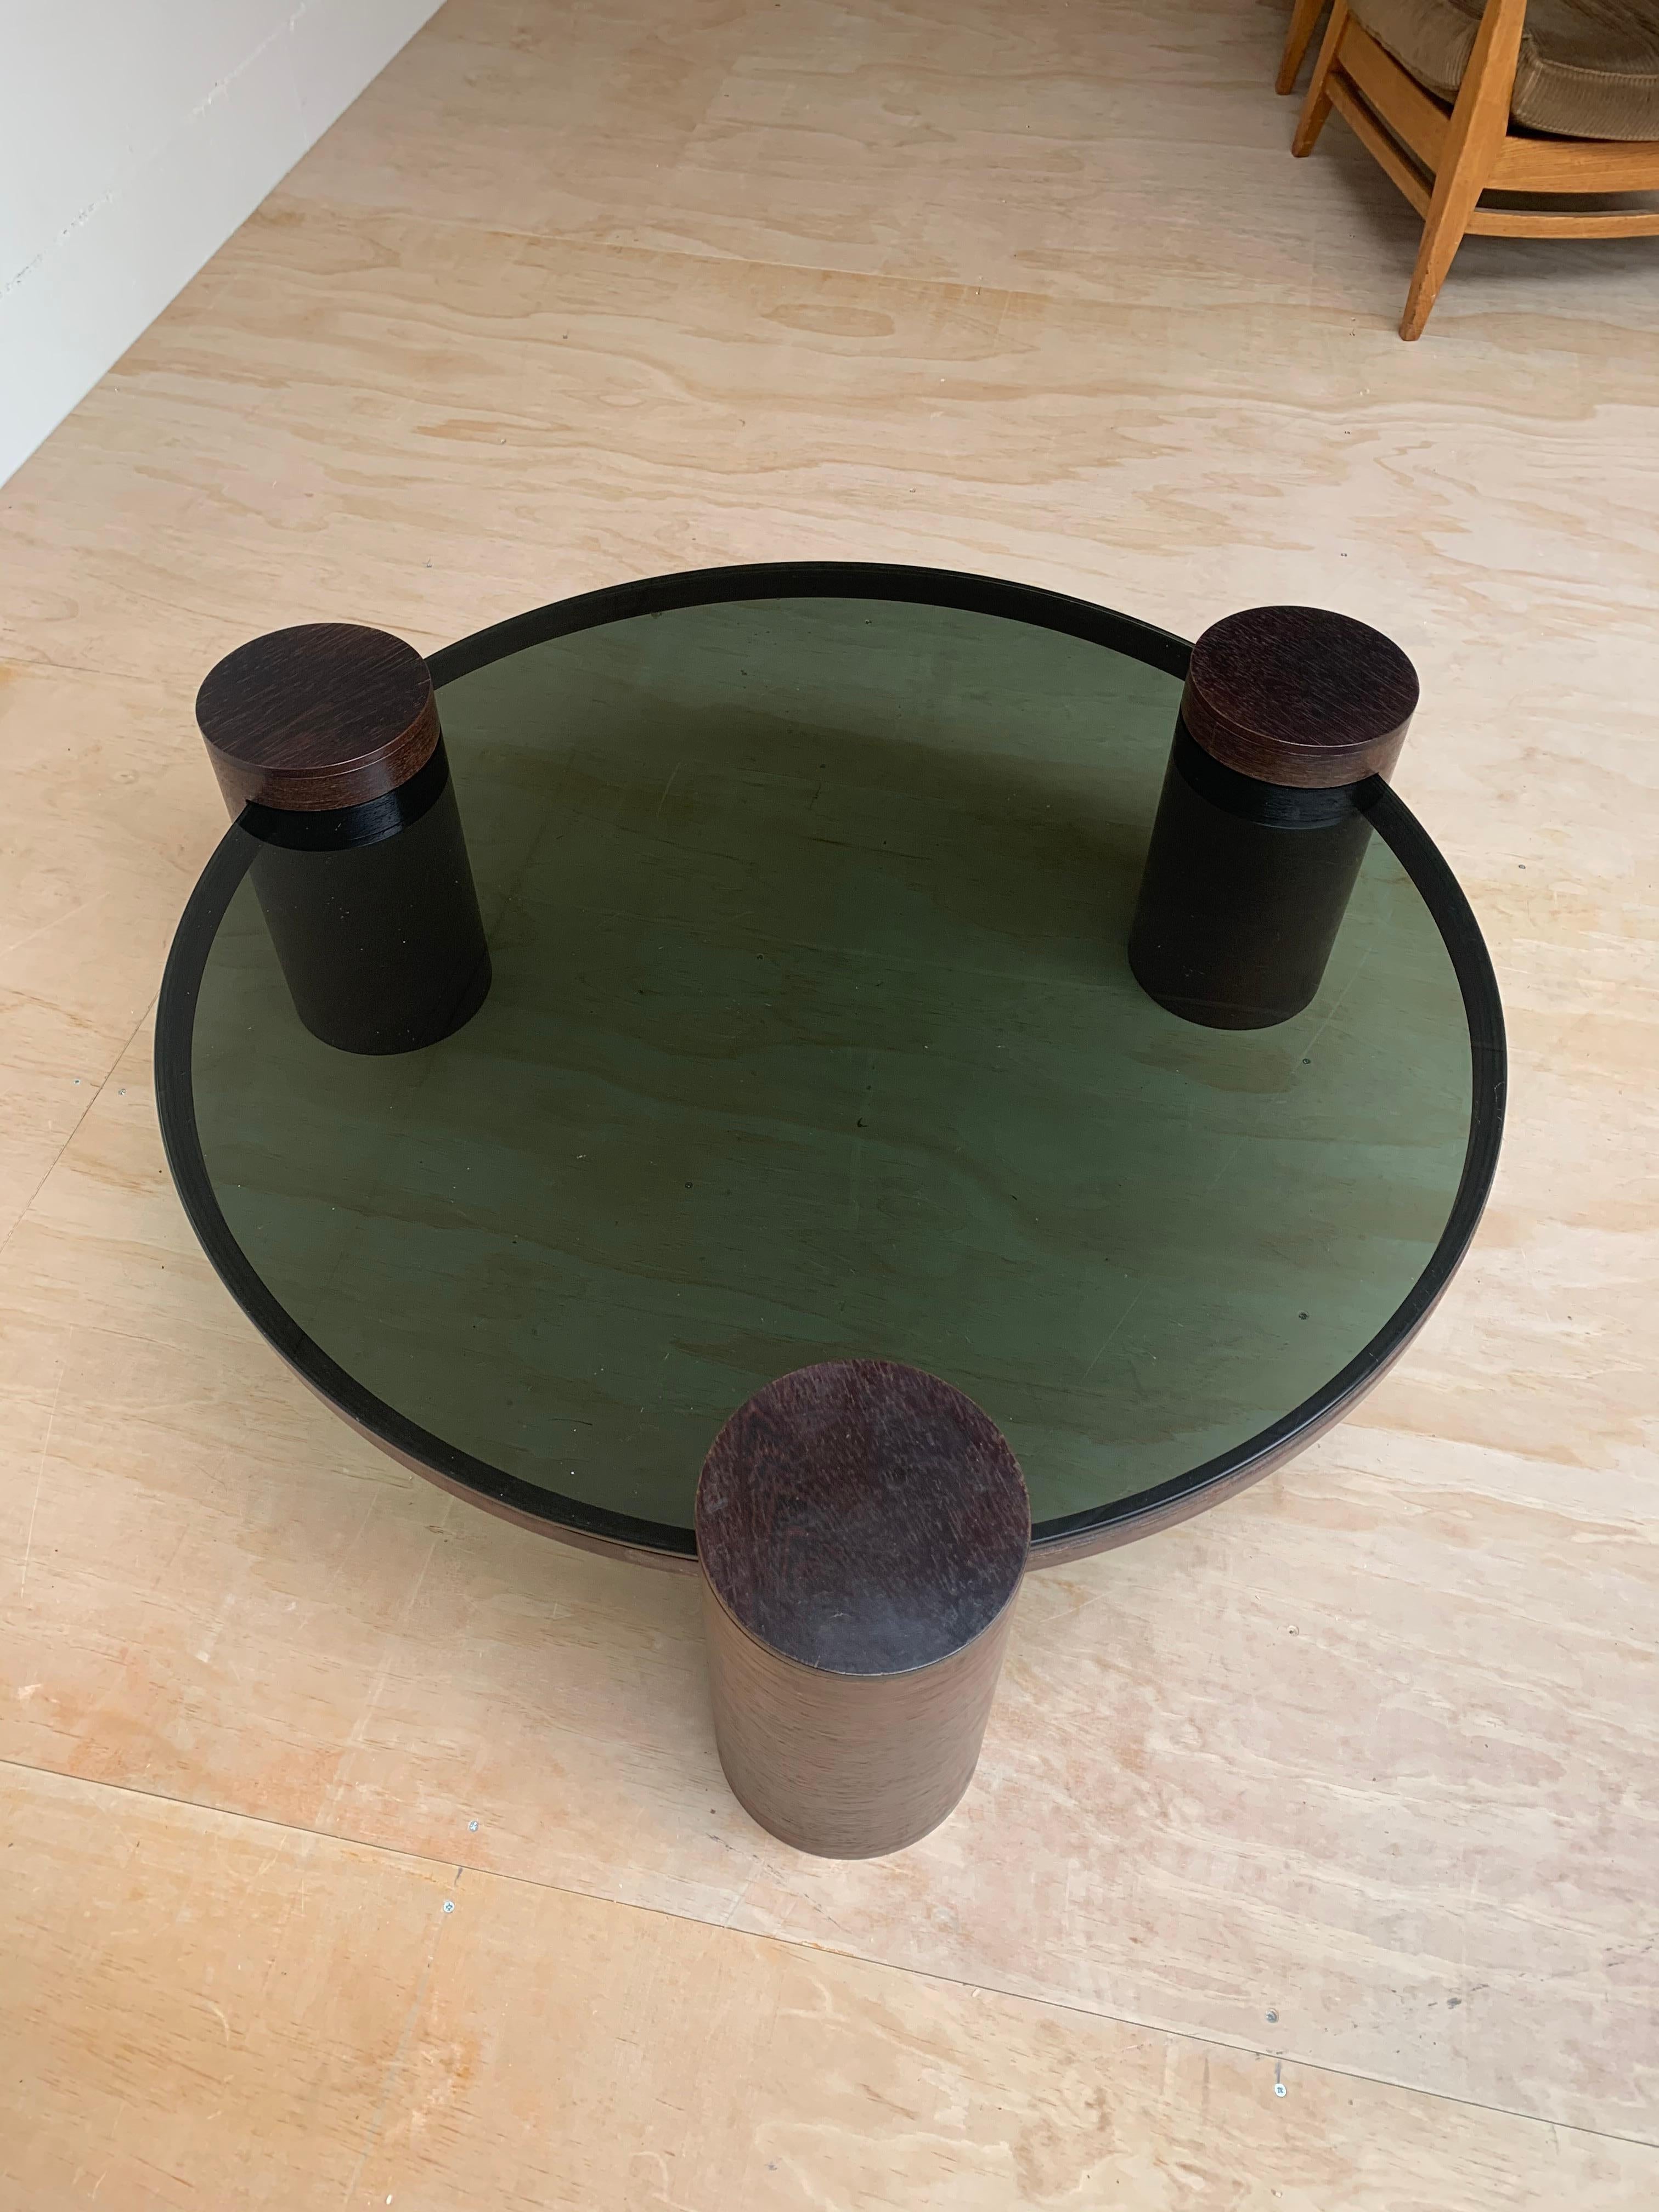 Unique Midcentury Modern Smoked Green Glass Coffee Table w Three Wooden Columns For Sale 2